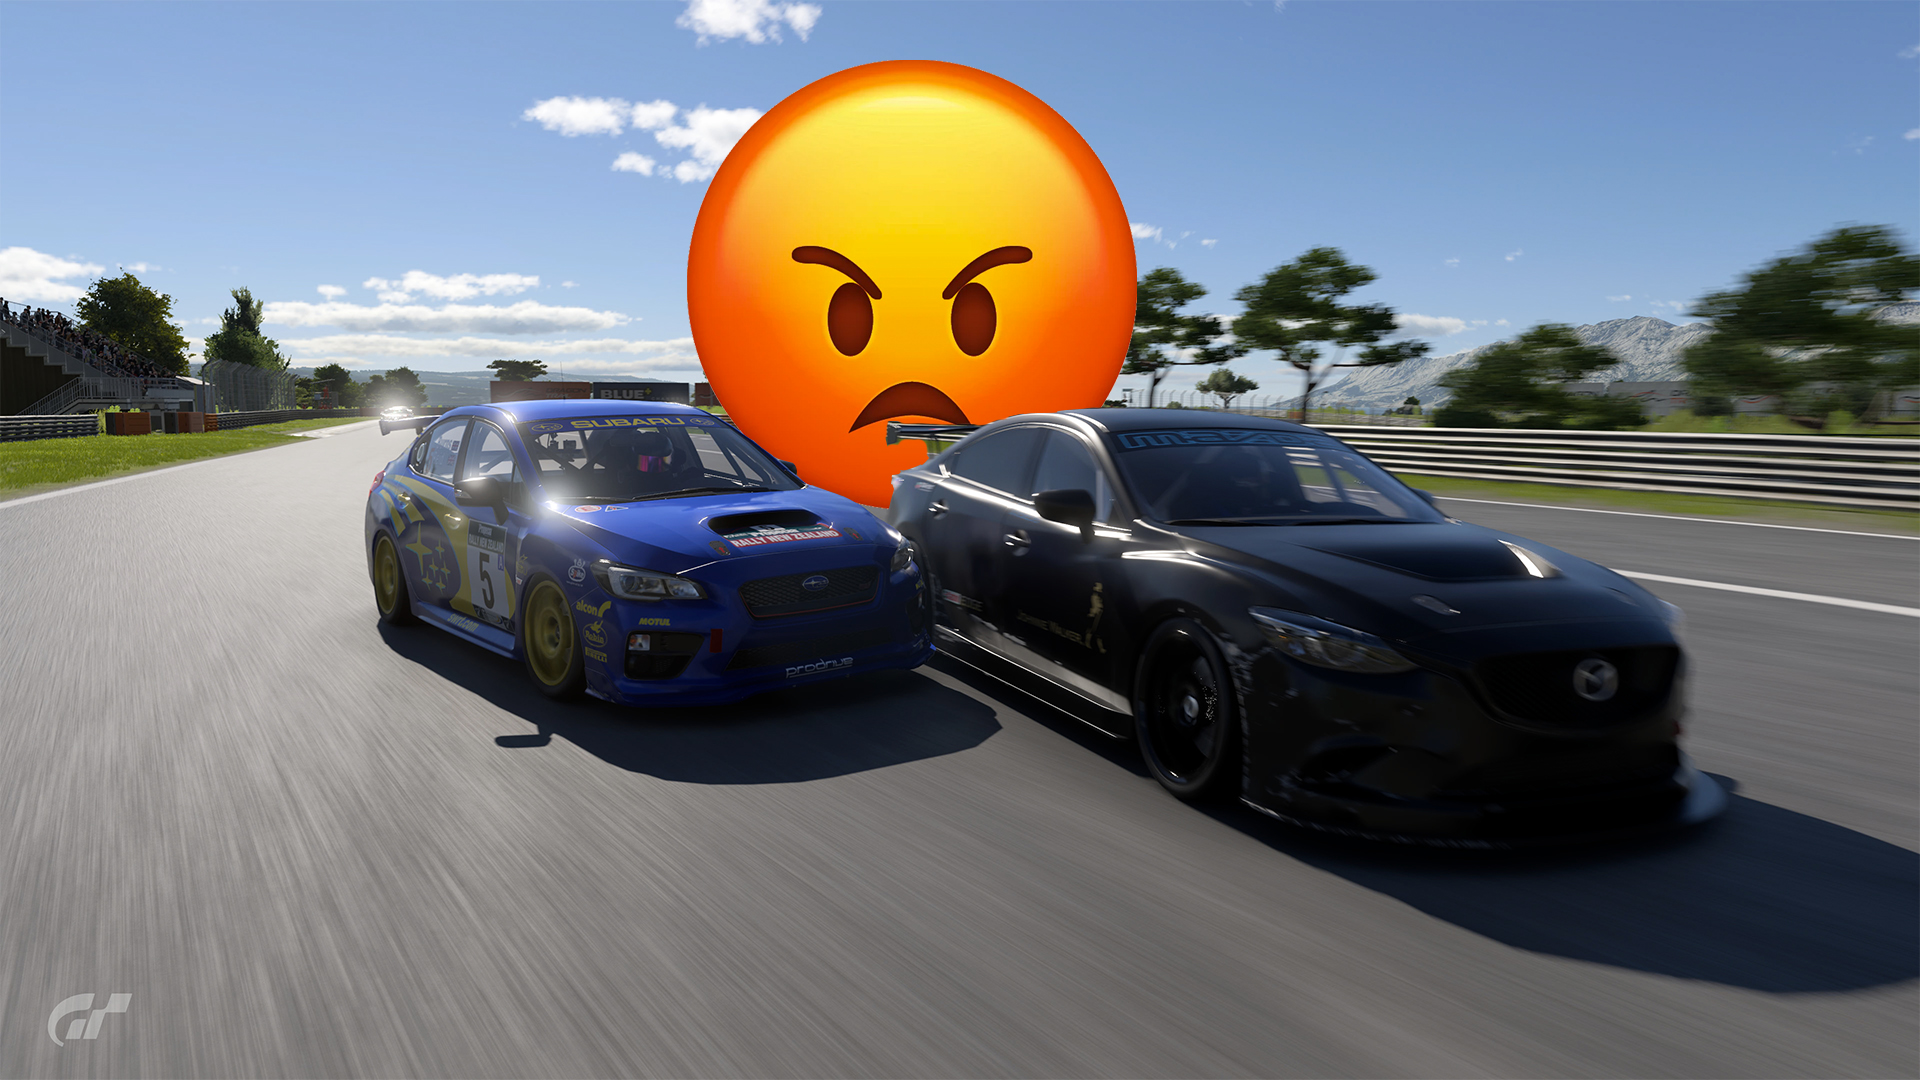 Gran Turismo 7's multiplayer is broken — here's how it should be fixed